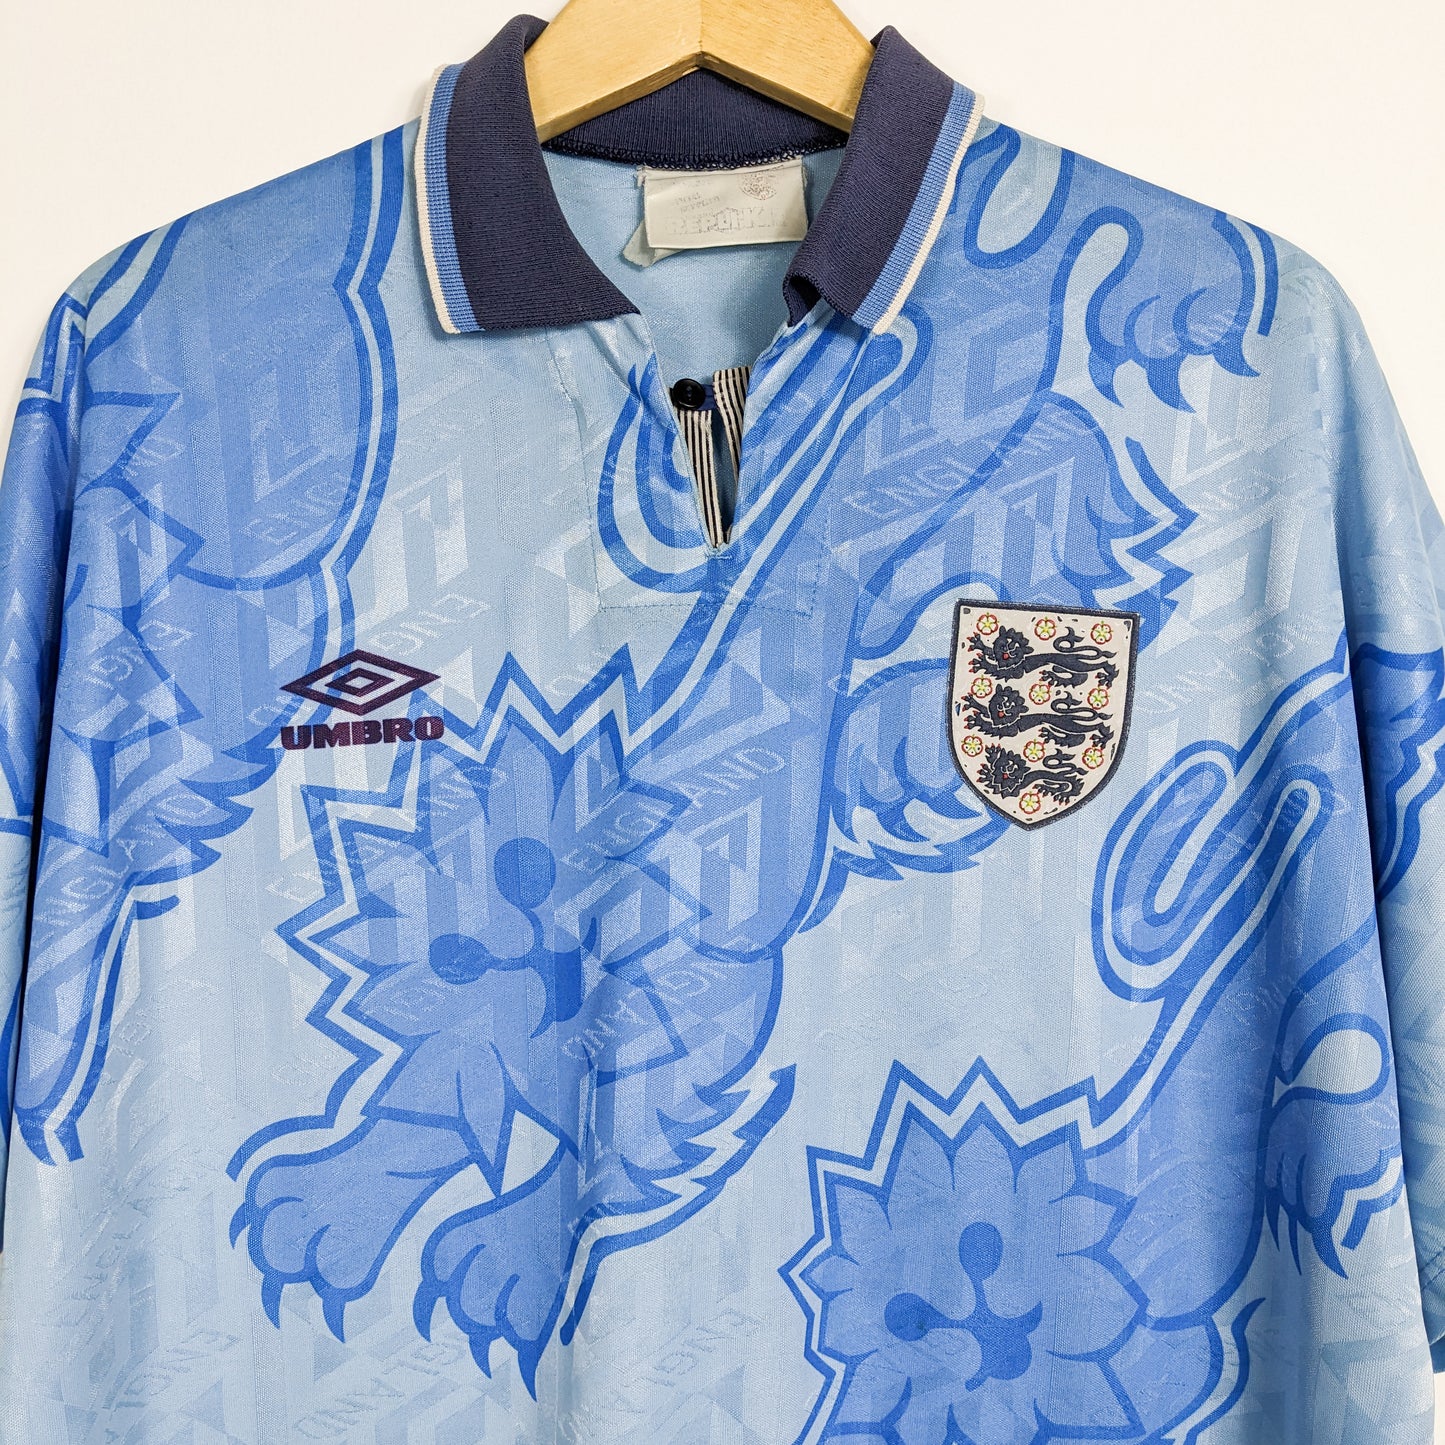 Authentic England 1992/1993 Third - Size L